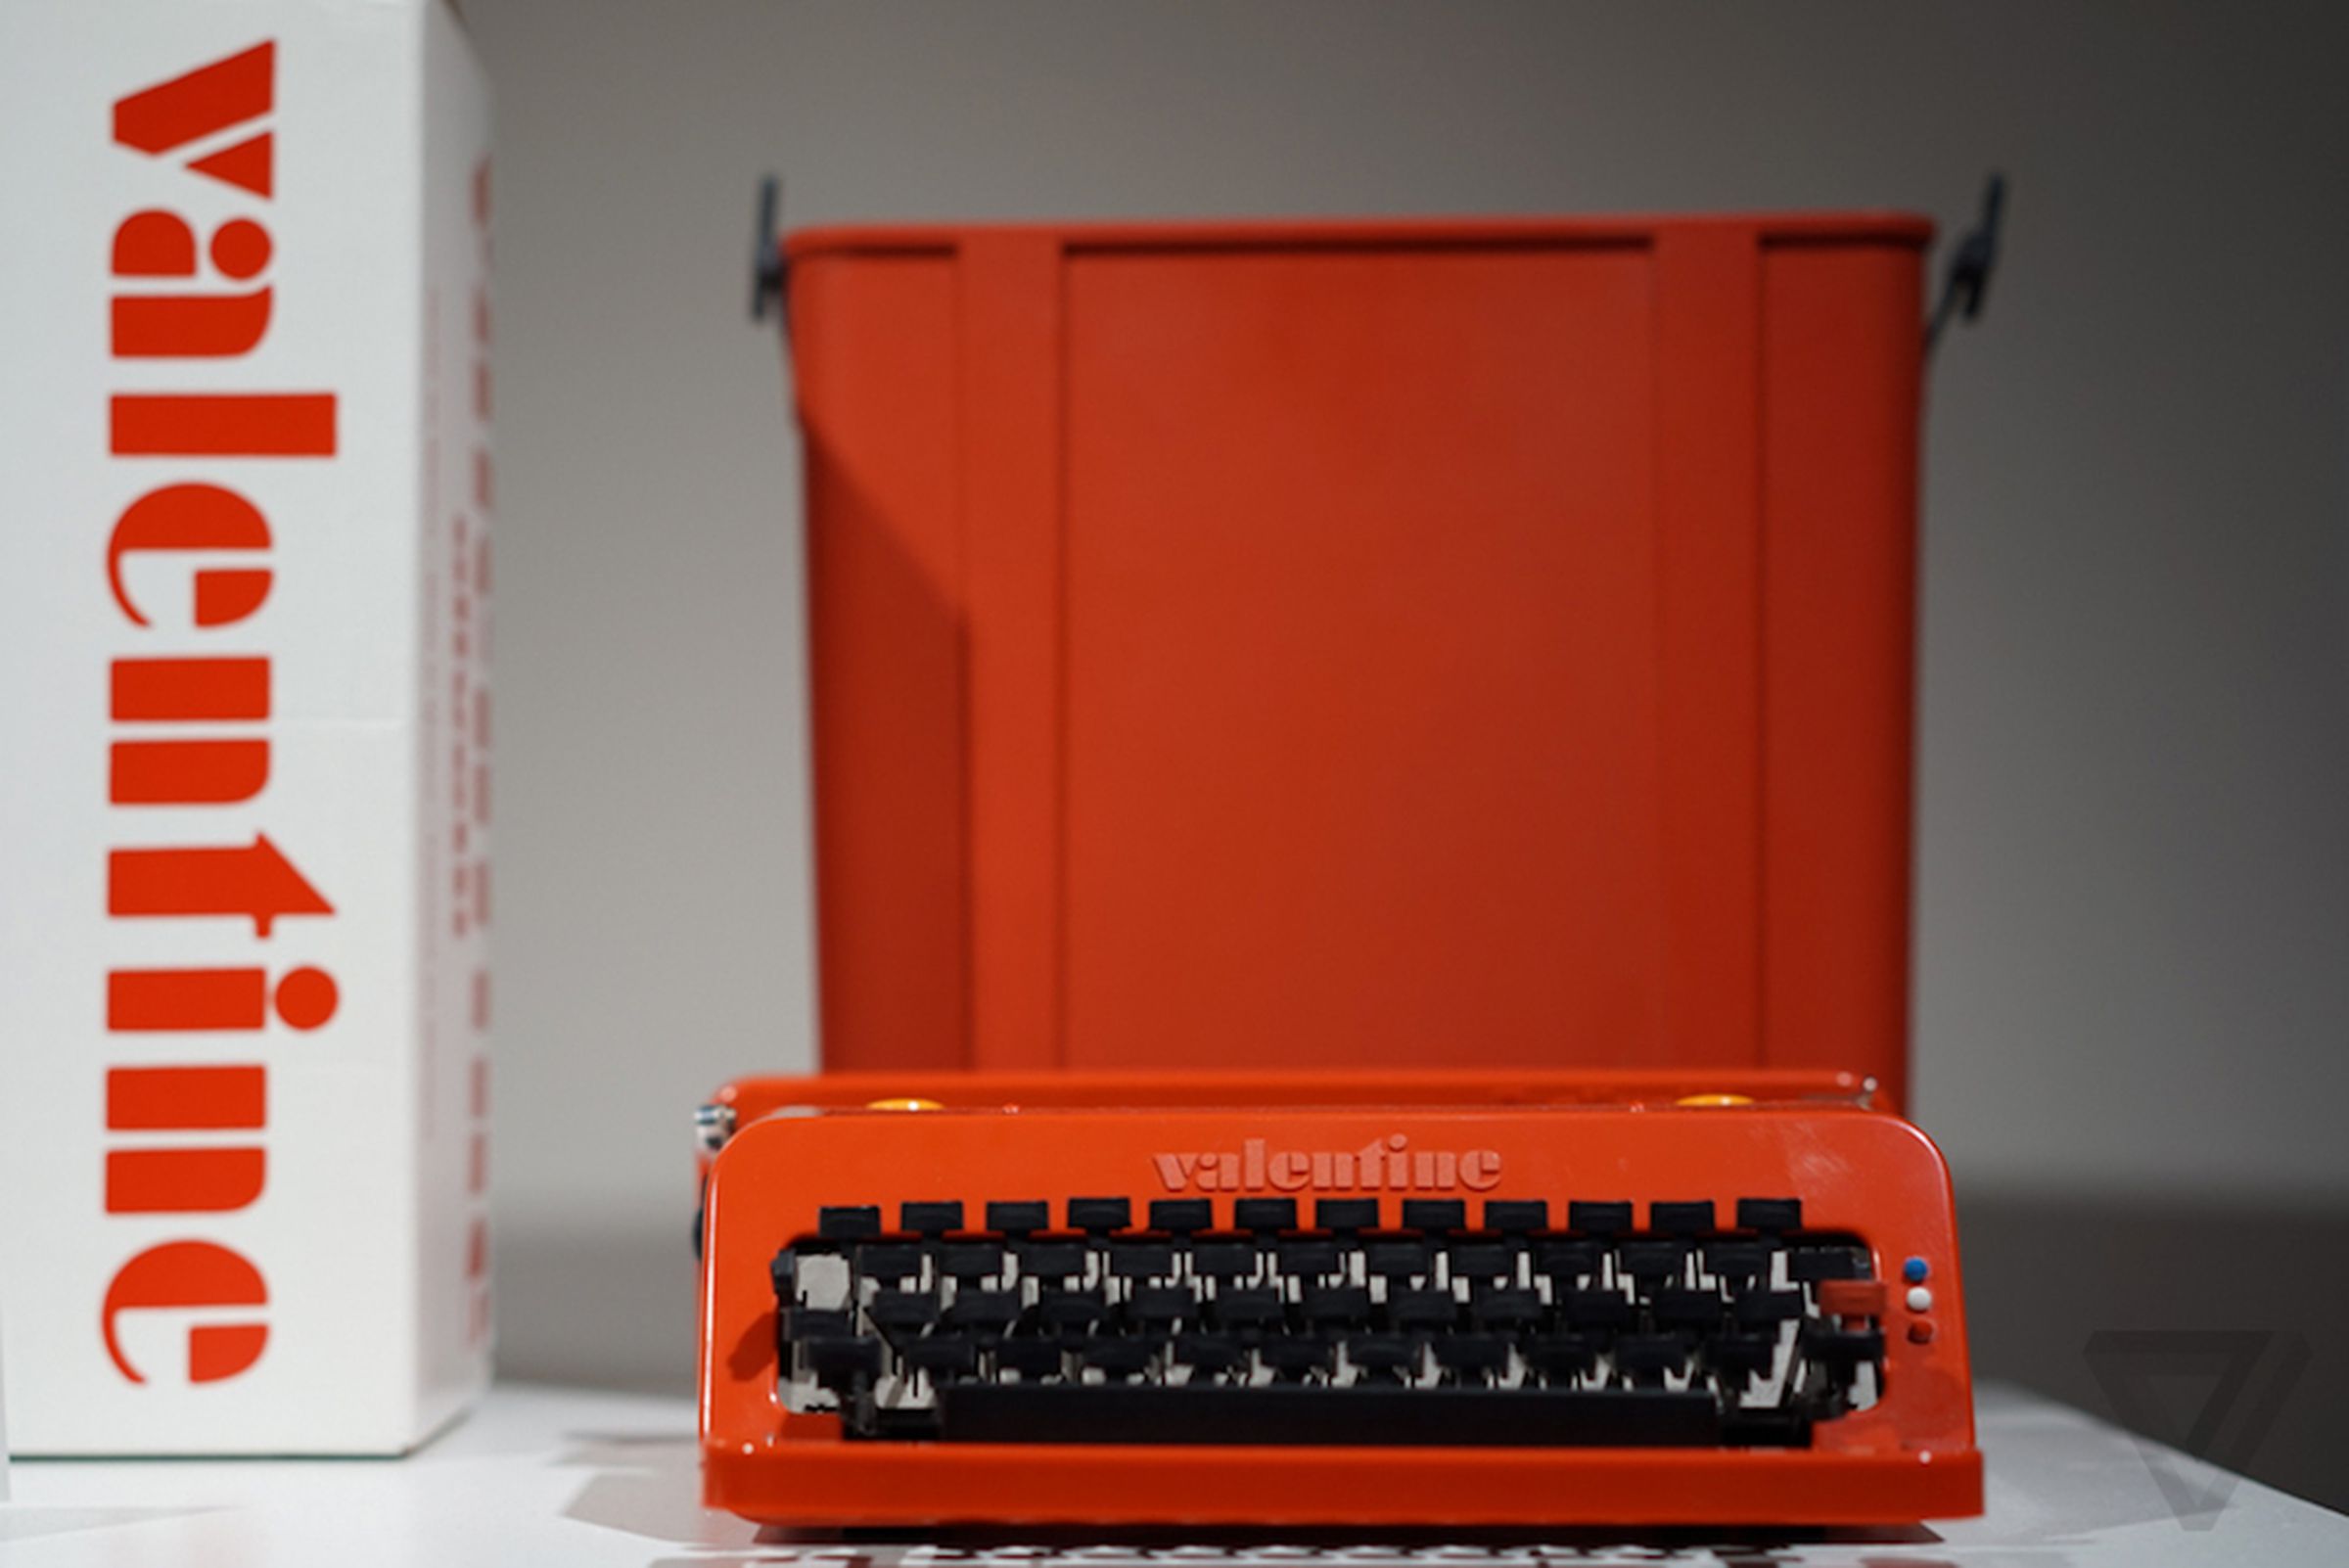 Jony Ive and Marc Newson's Red Auction at Sotheby's